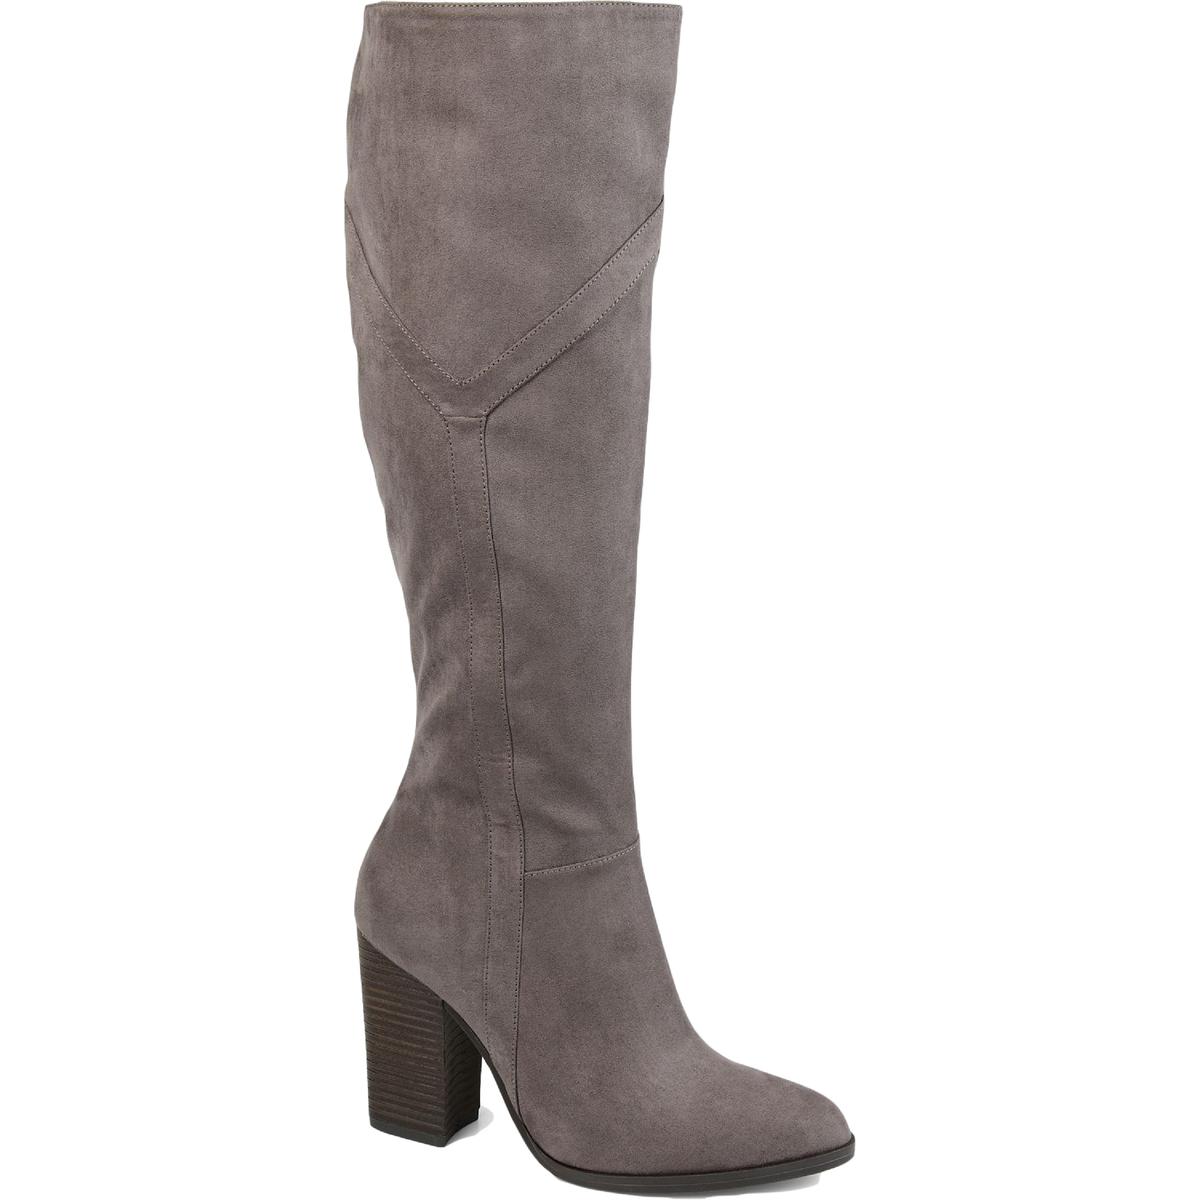 Journee Collection Womens Kyllie Extra Wide Calf Knee-High Boots